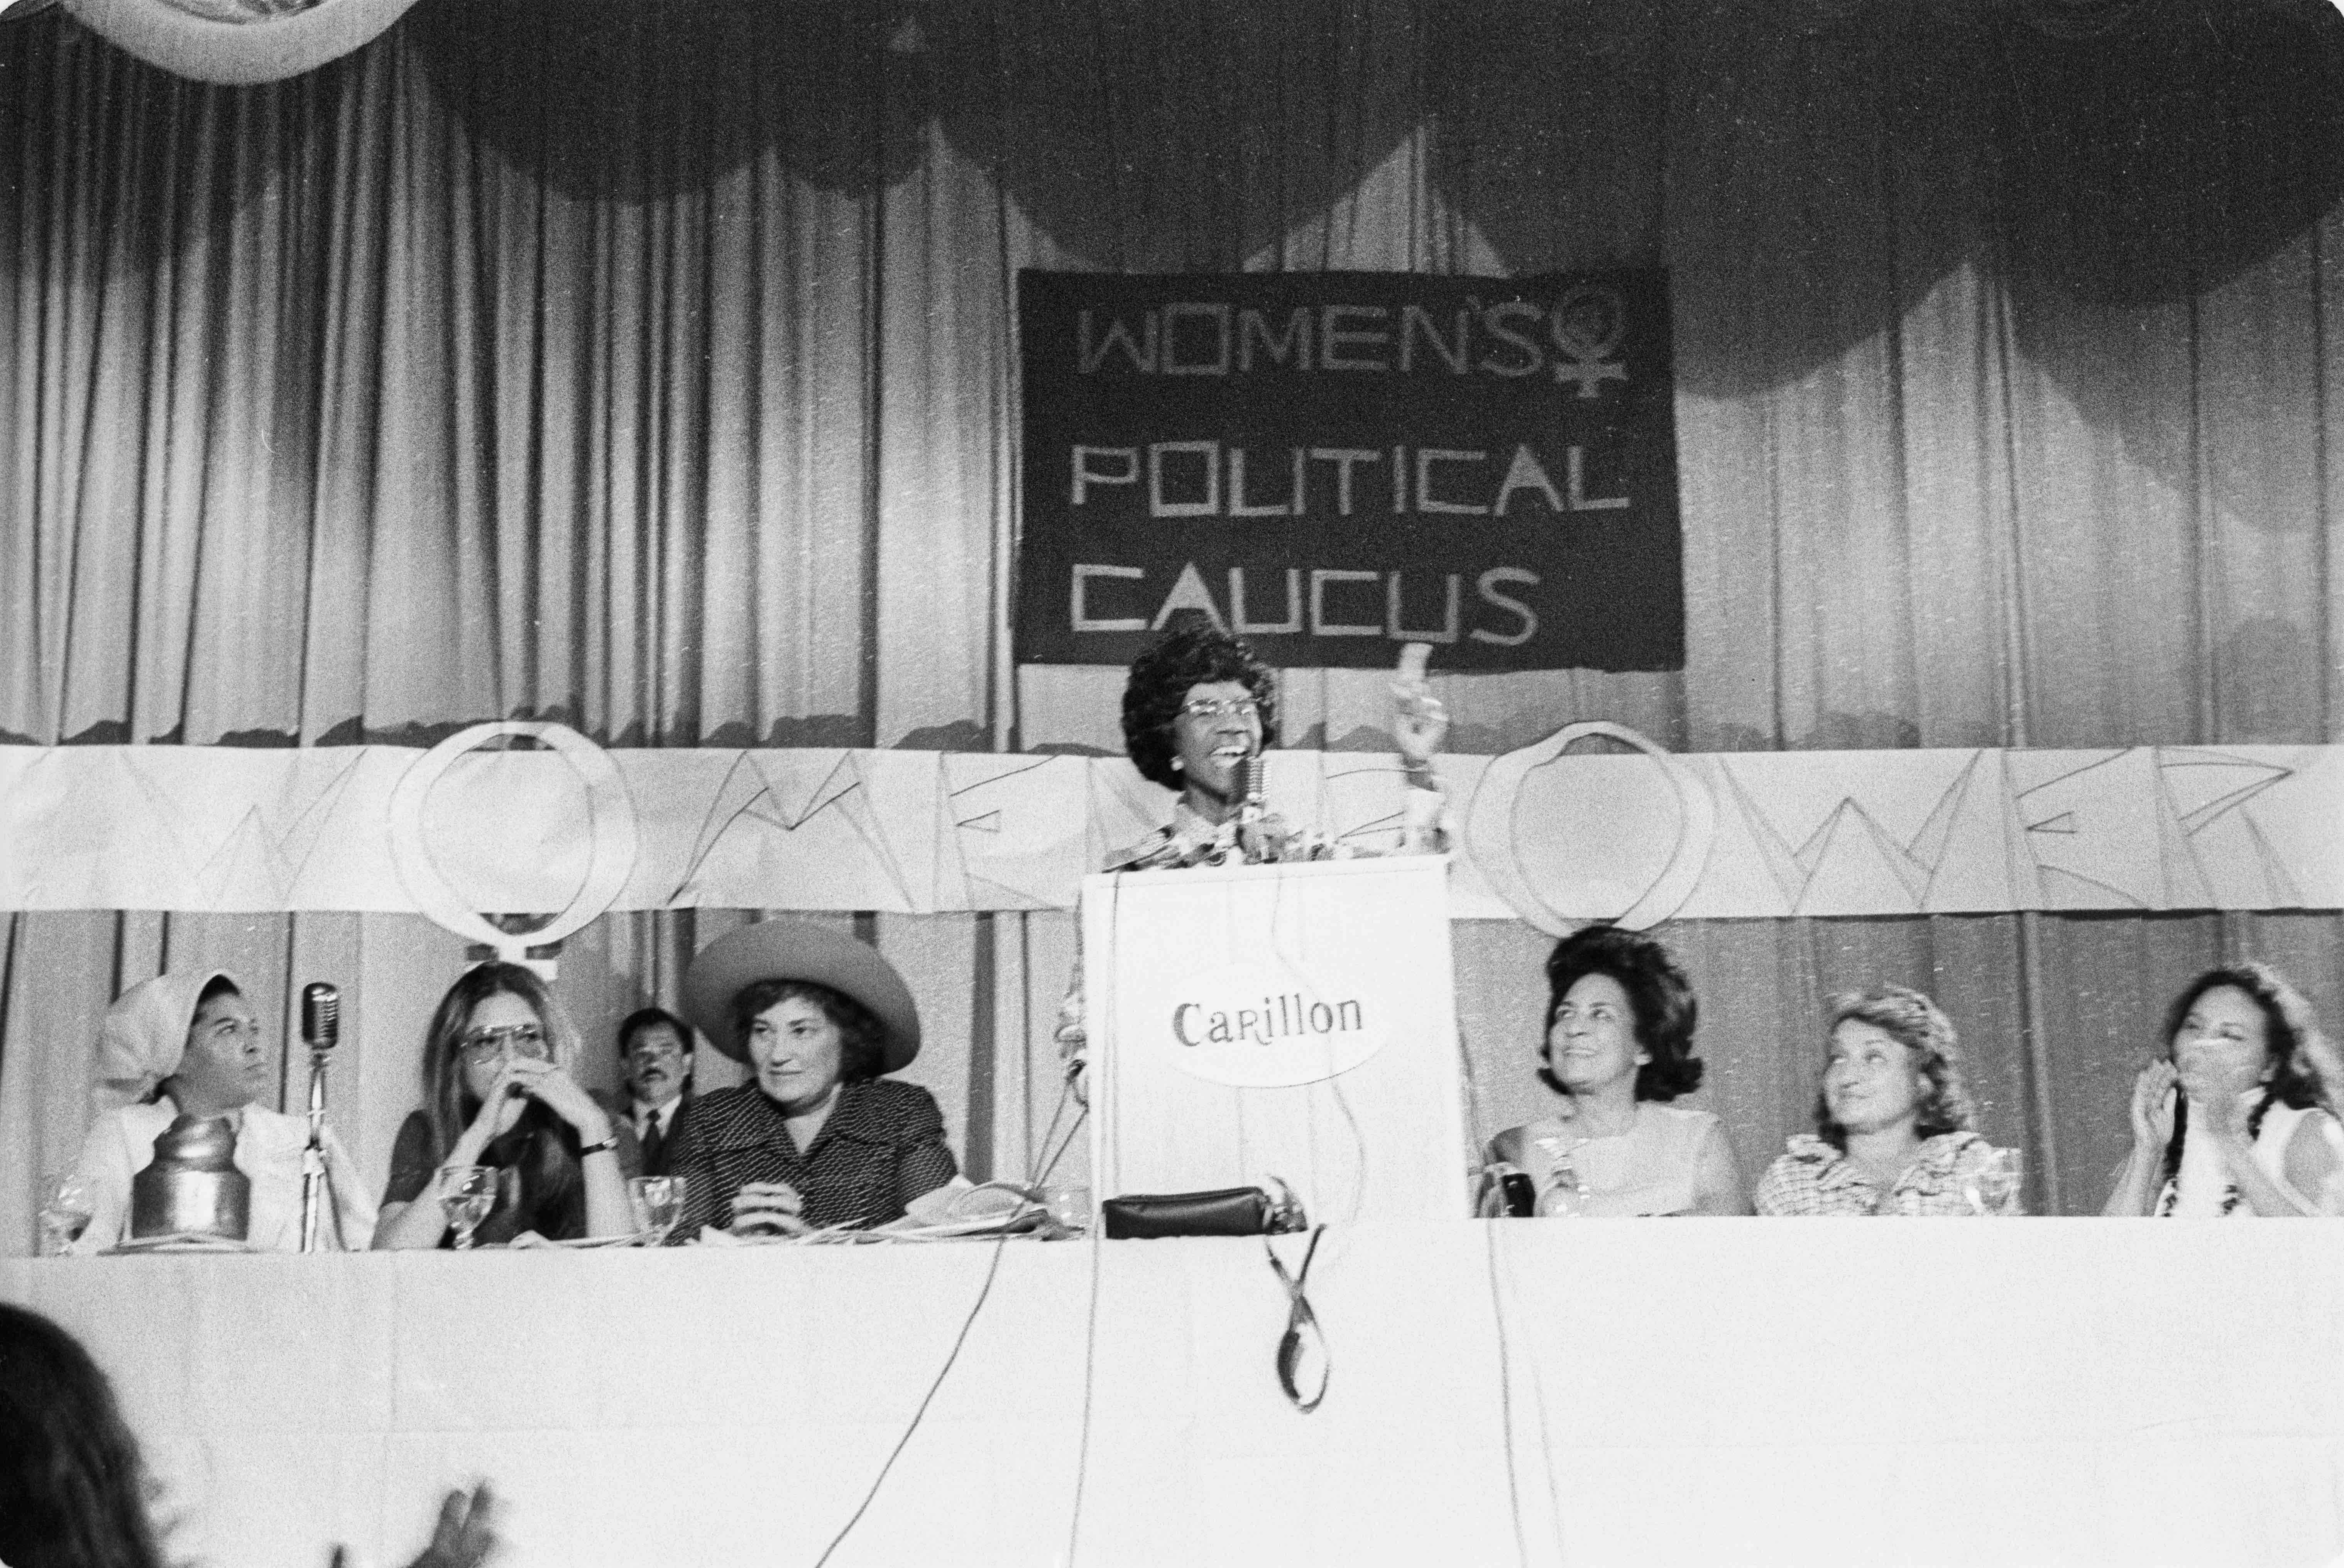 Photograph of Meeting of the National Women’s Political Caucus